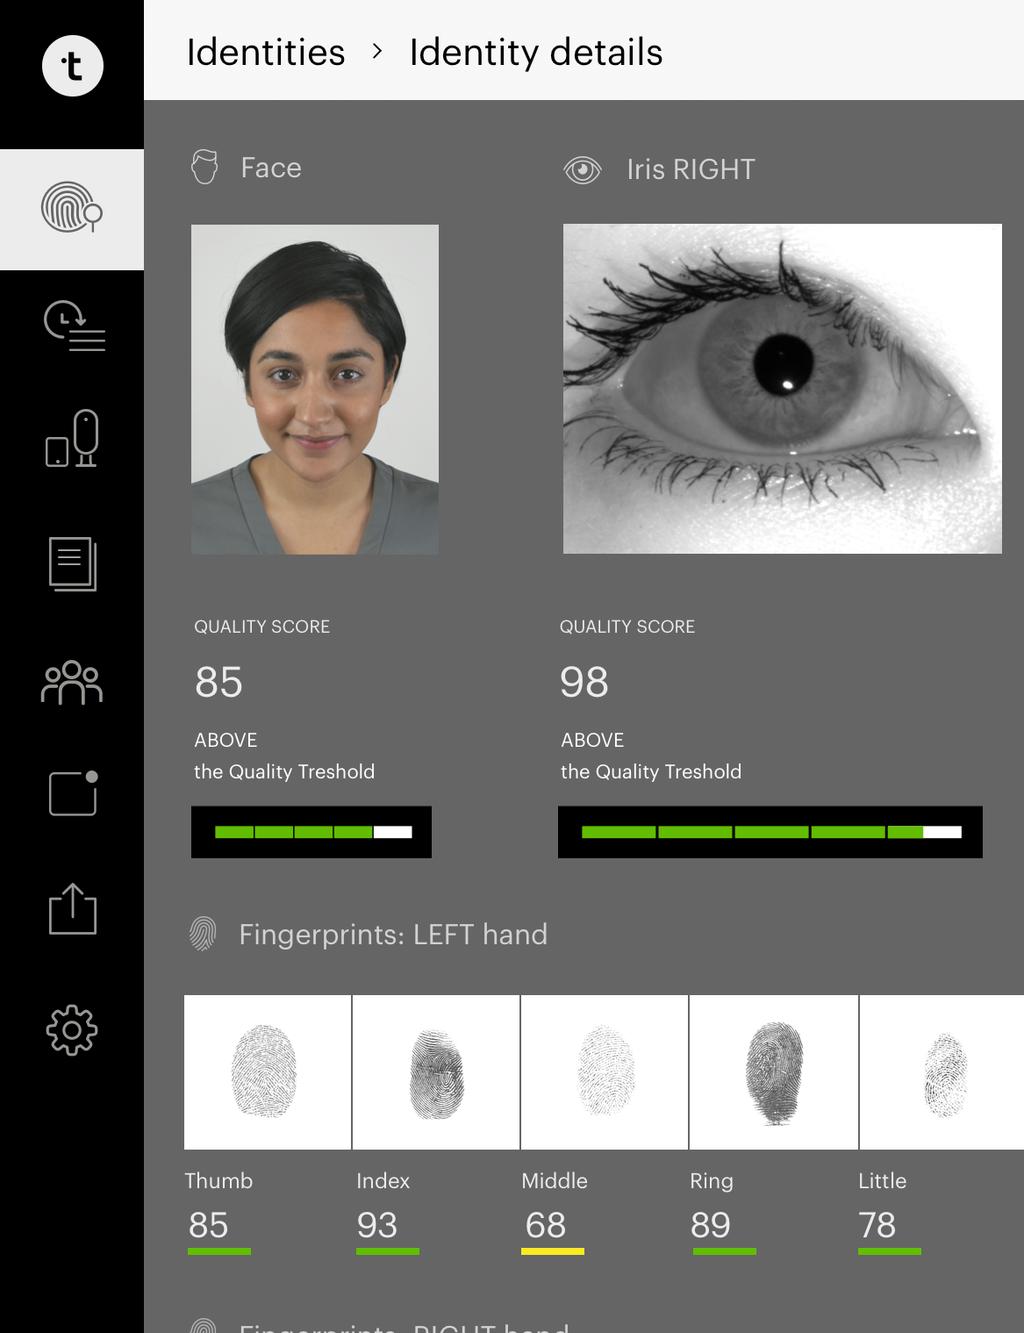 Deploy a secure, scalable biometric identity system with ease: u Match with confidence Reliably match against iris, face, and fingerprint using advanced, scalable algorithms u Optimize enrollment